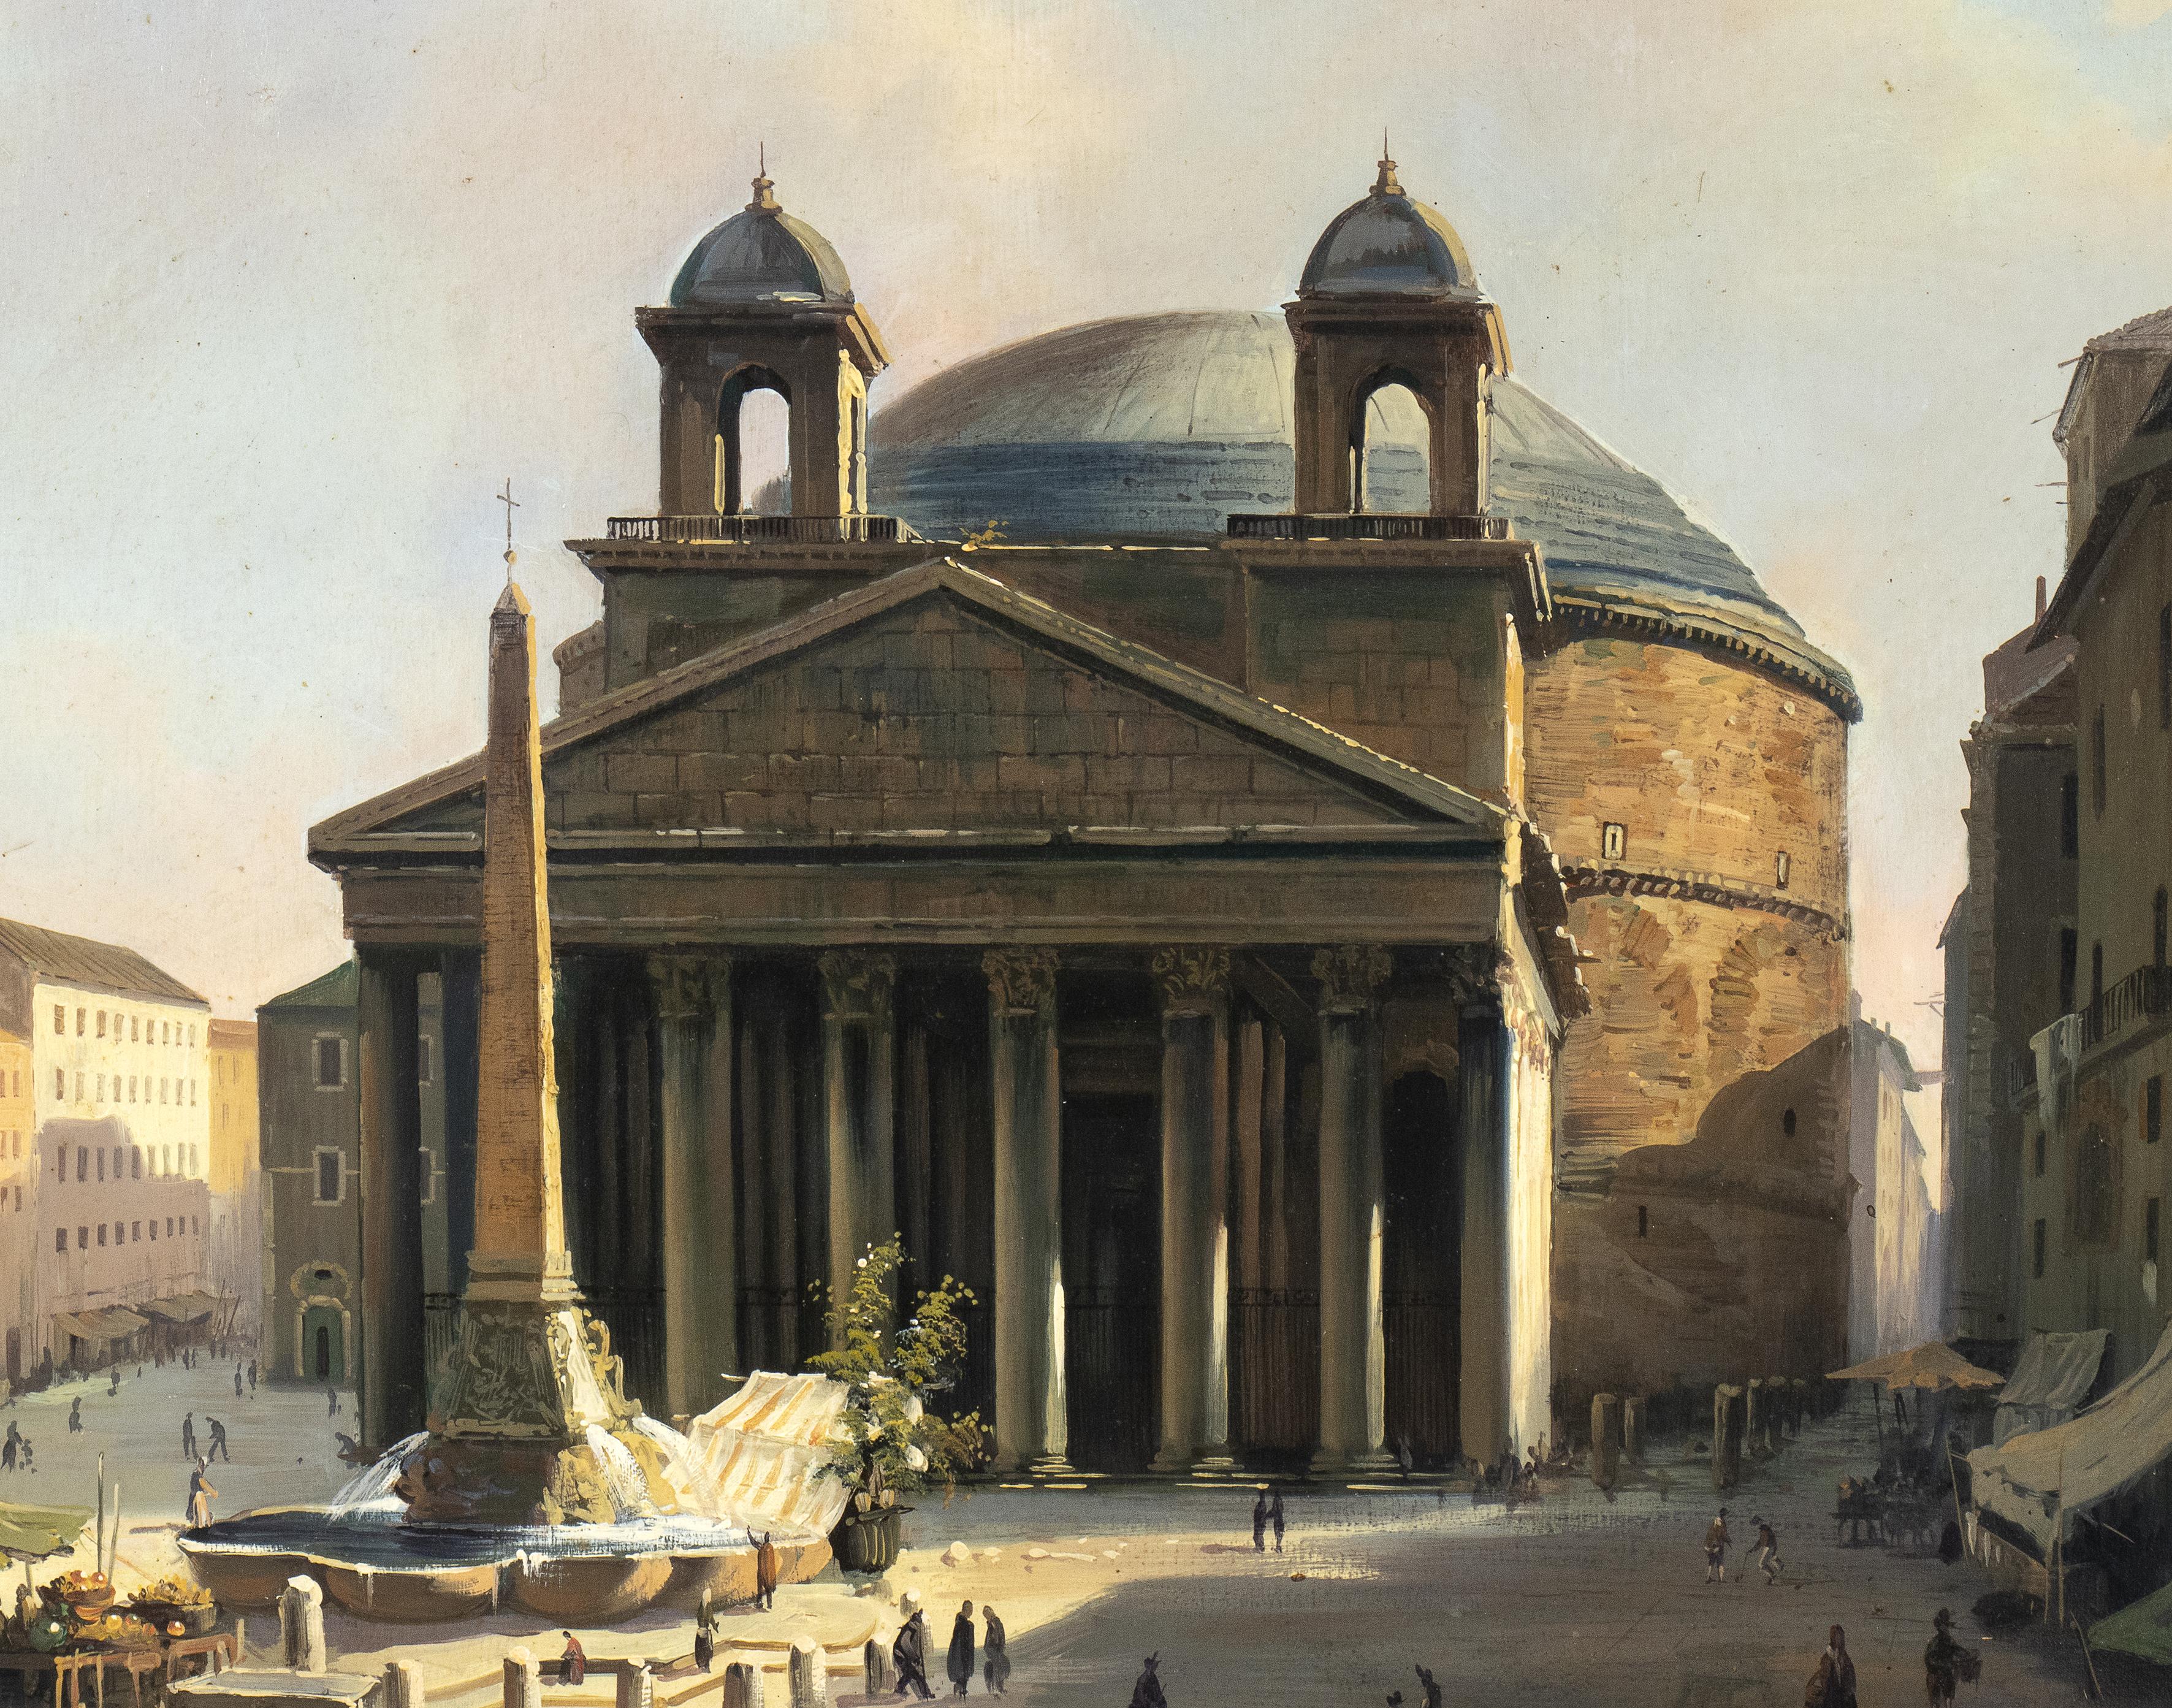 Landscape Oil Painting View Of Pantheon Rome Italian School Late 19th Century 1